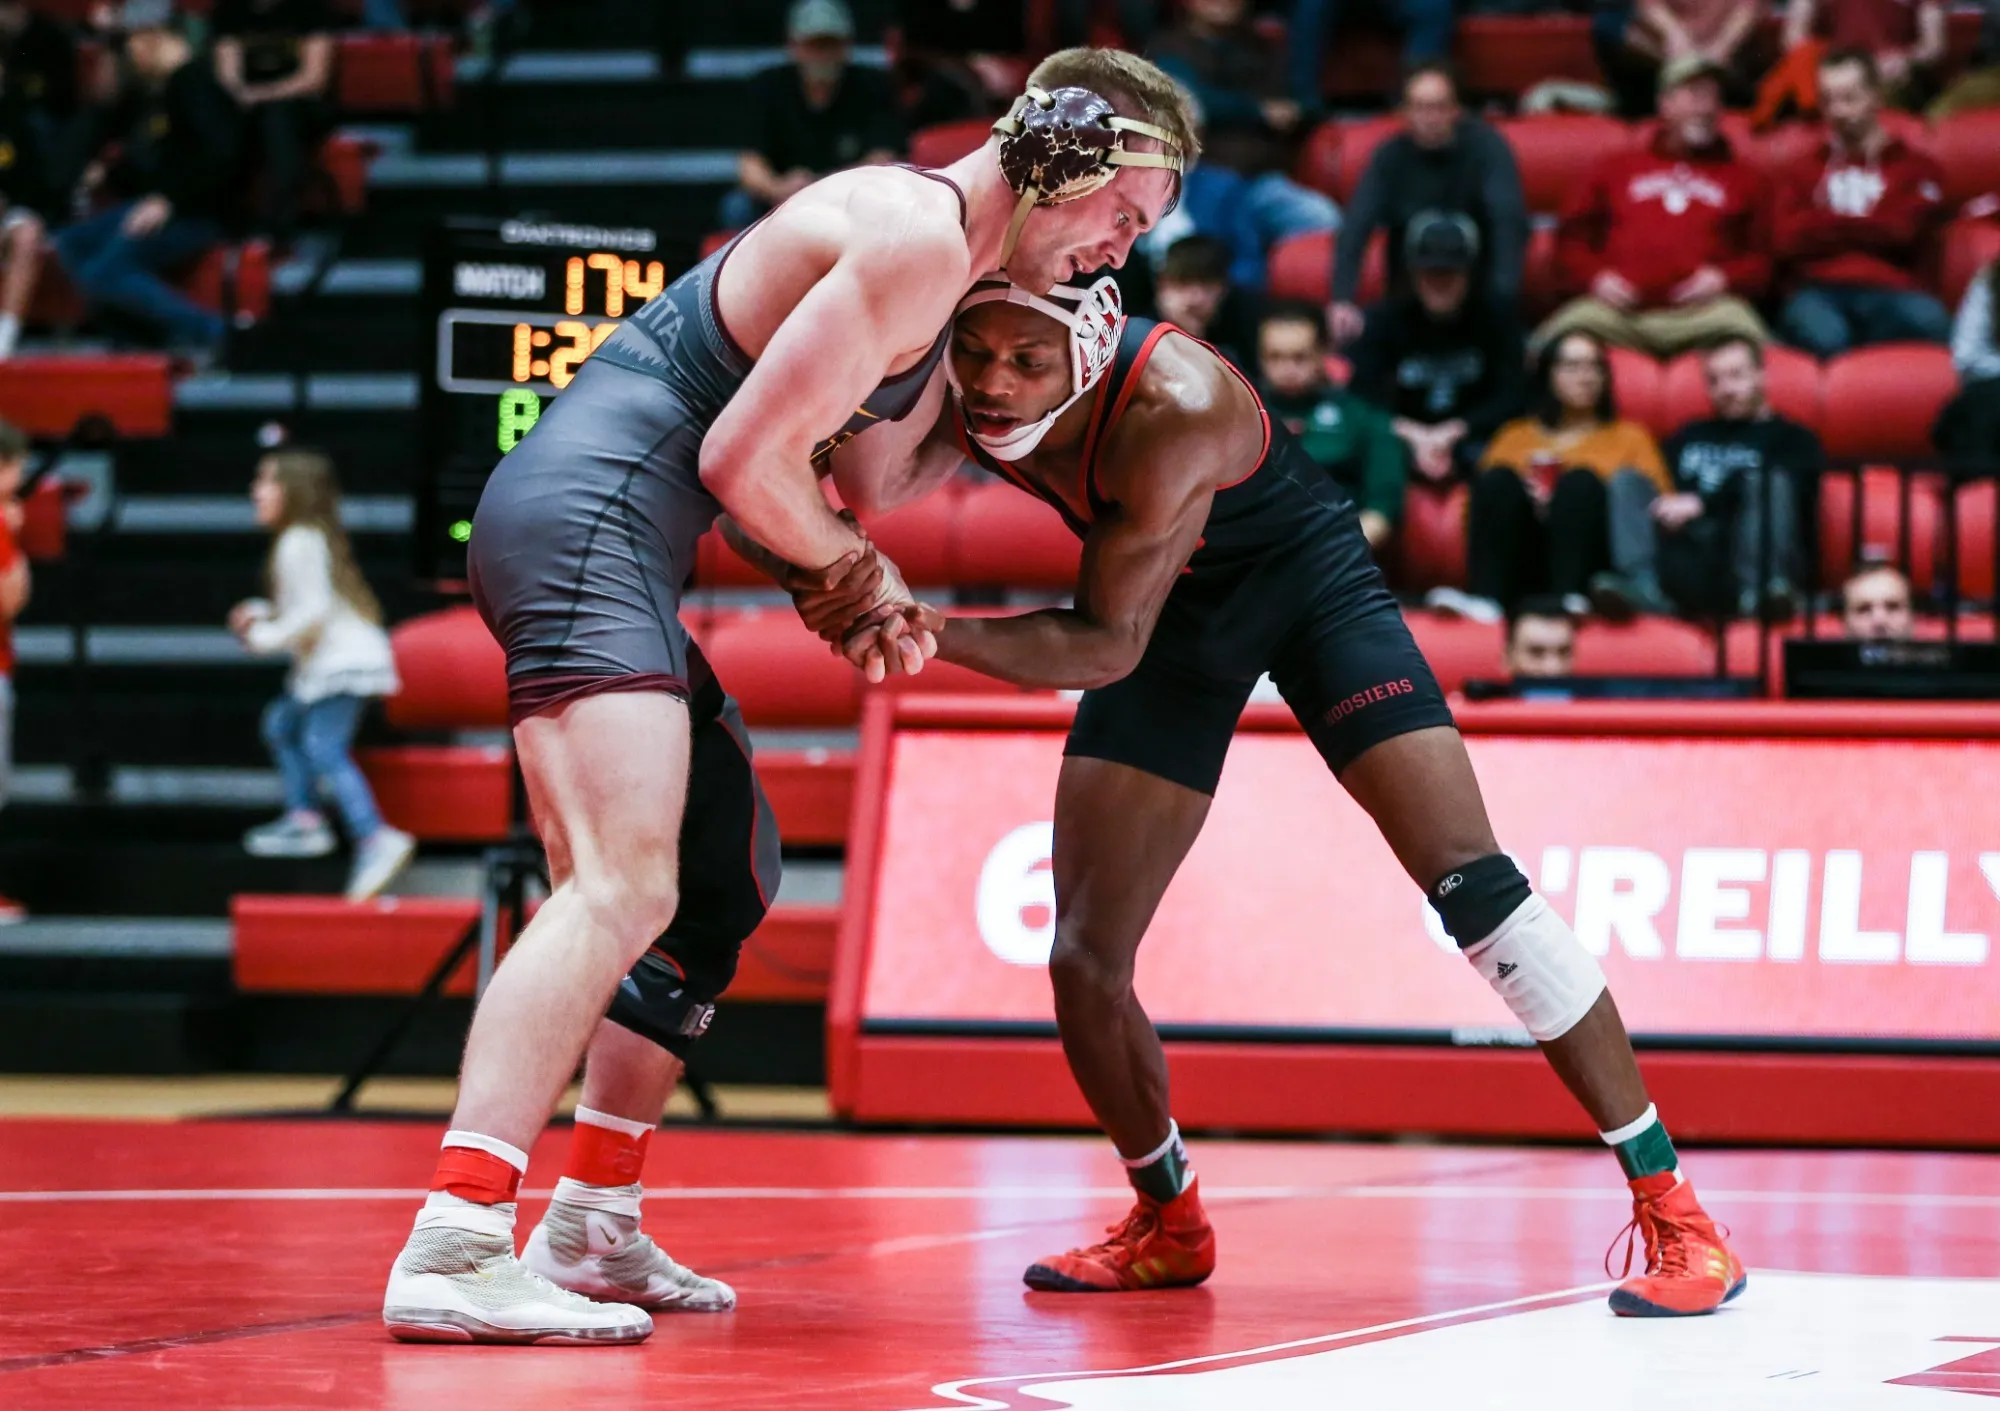 Finding the Edge – Washington Wrestles To Be the Best